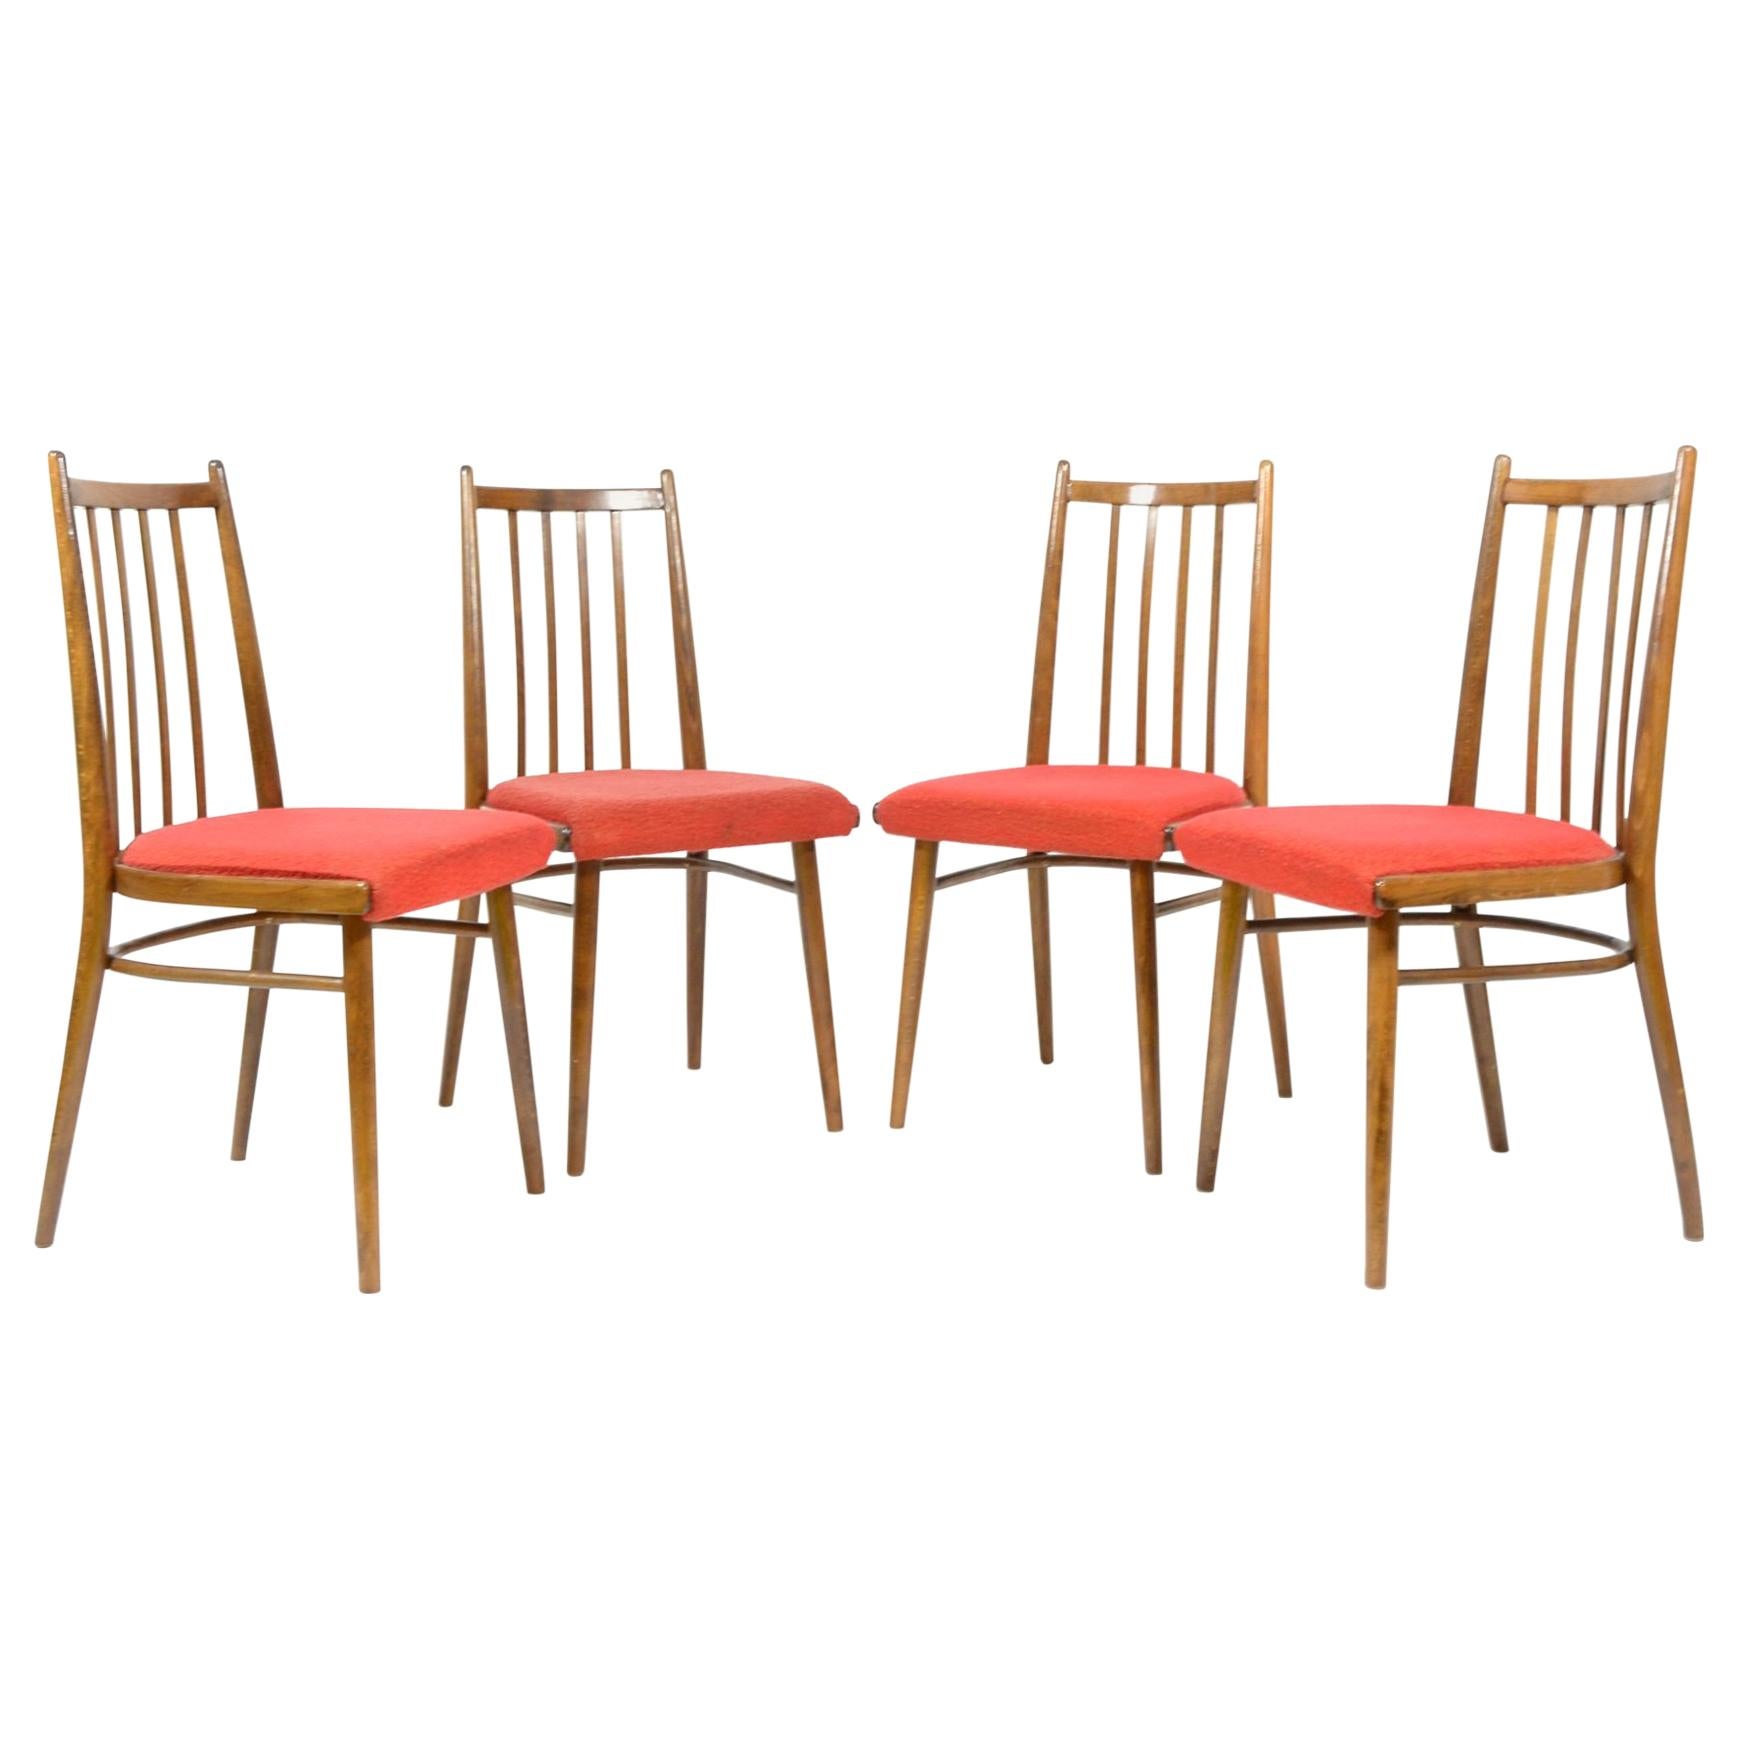 Set of Four Vintage Dining Chairs, Red Upholstered, Czechoslovakia, 1970s For Sale